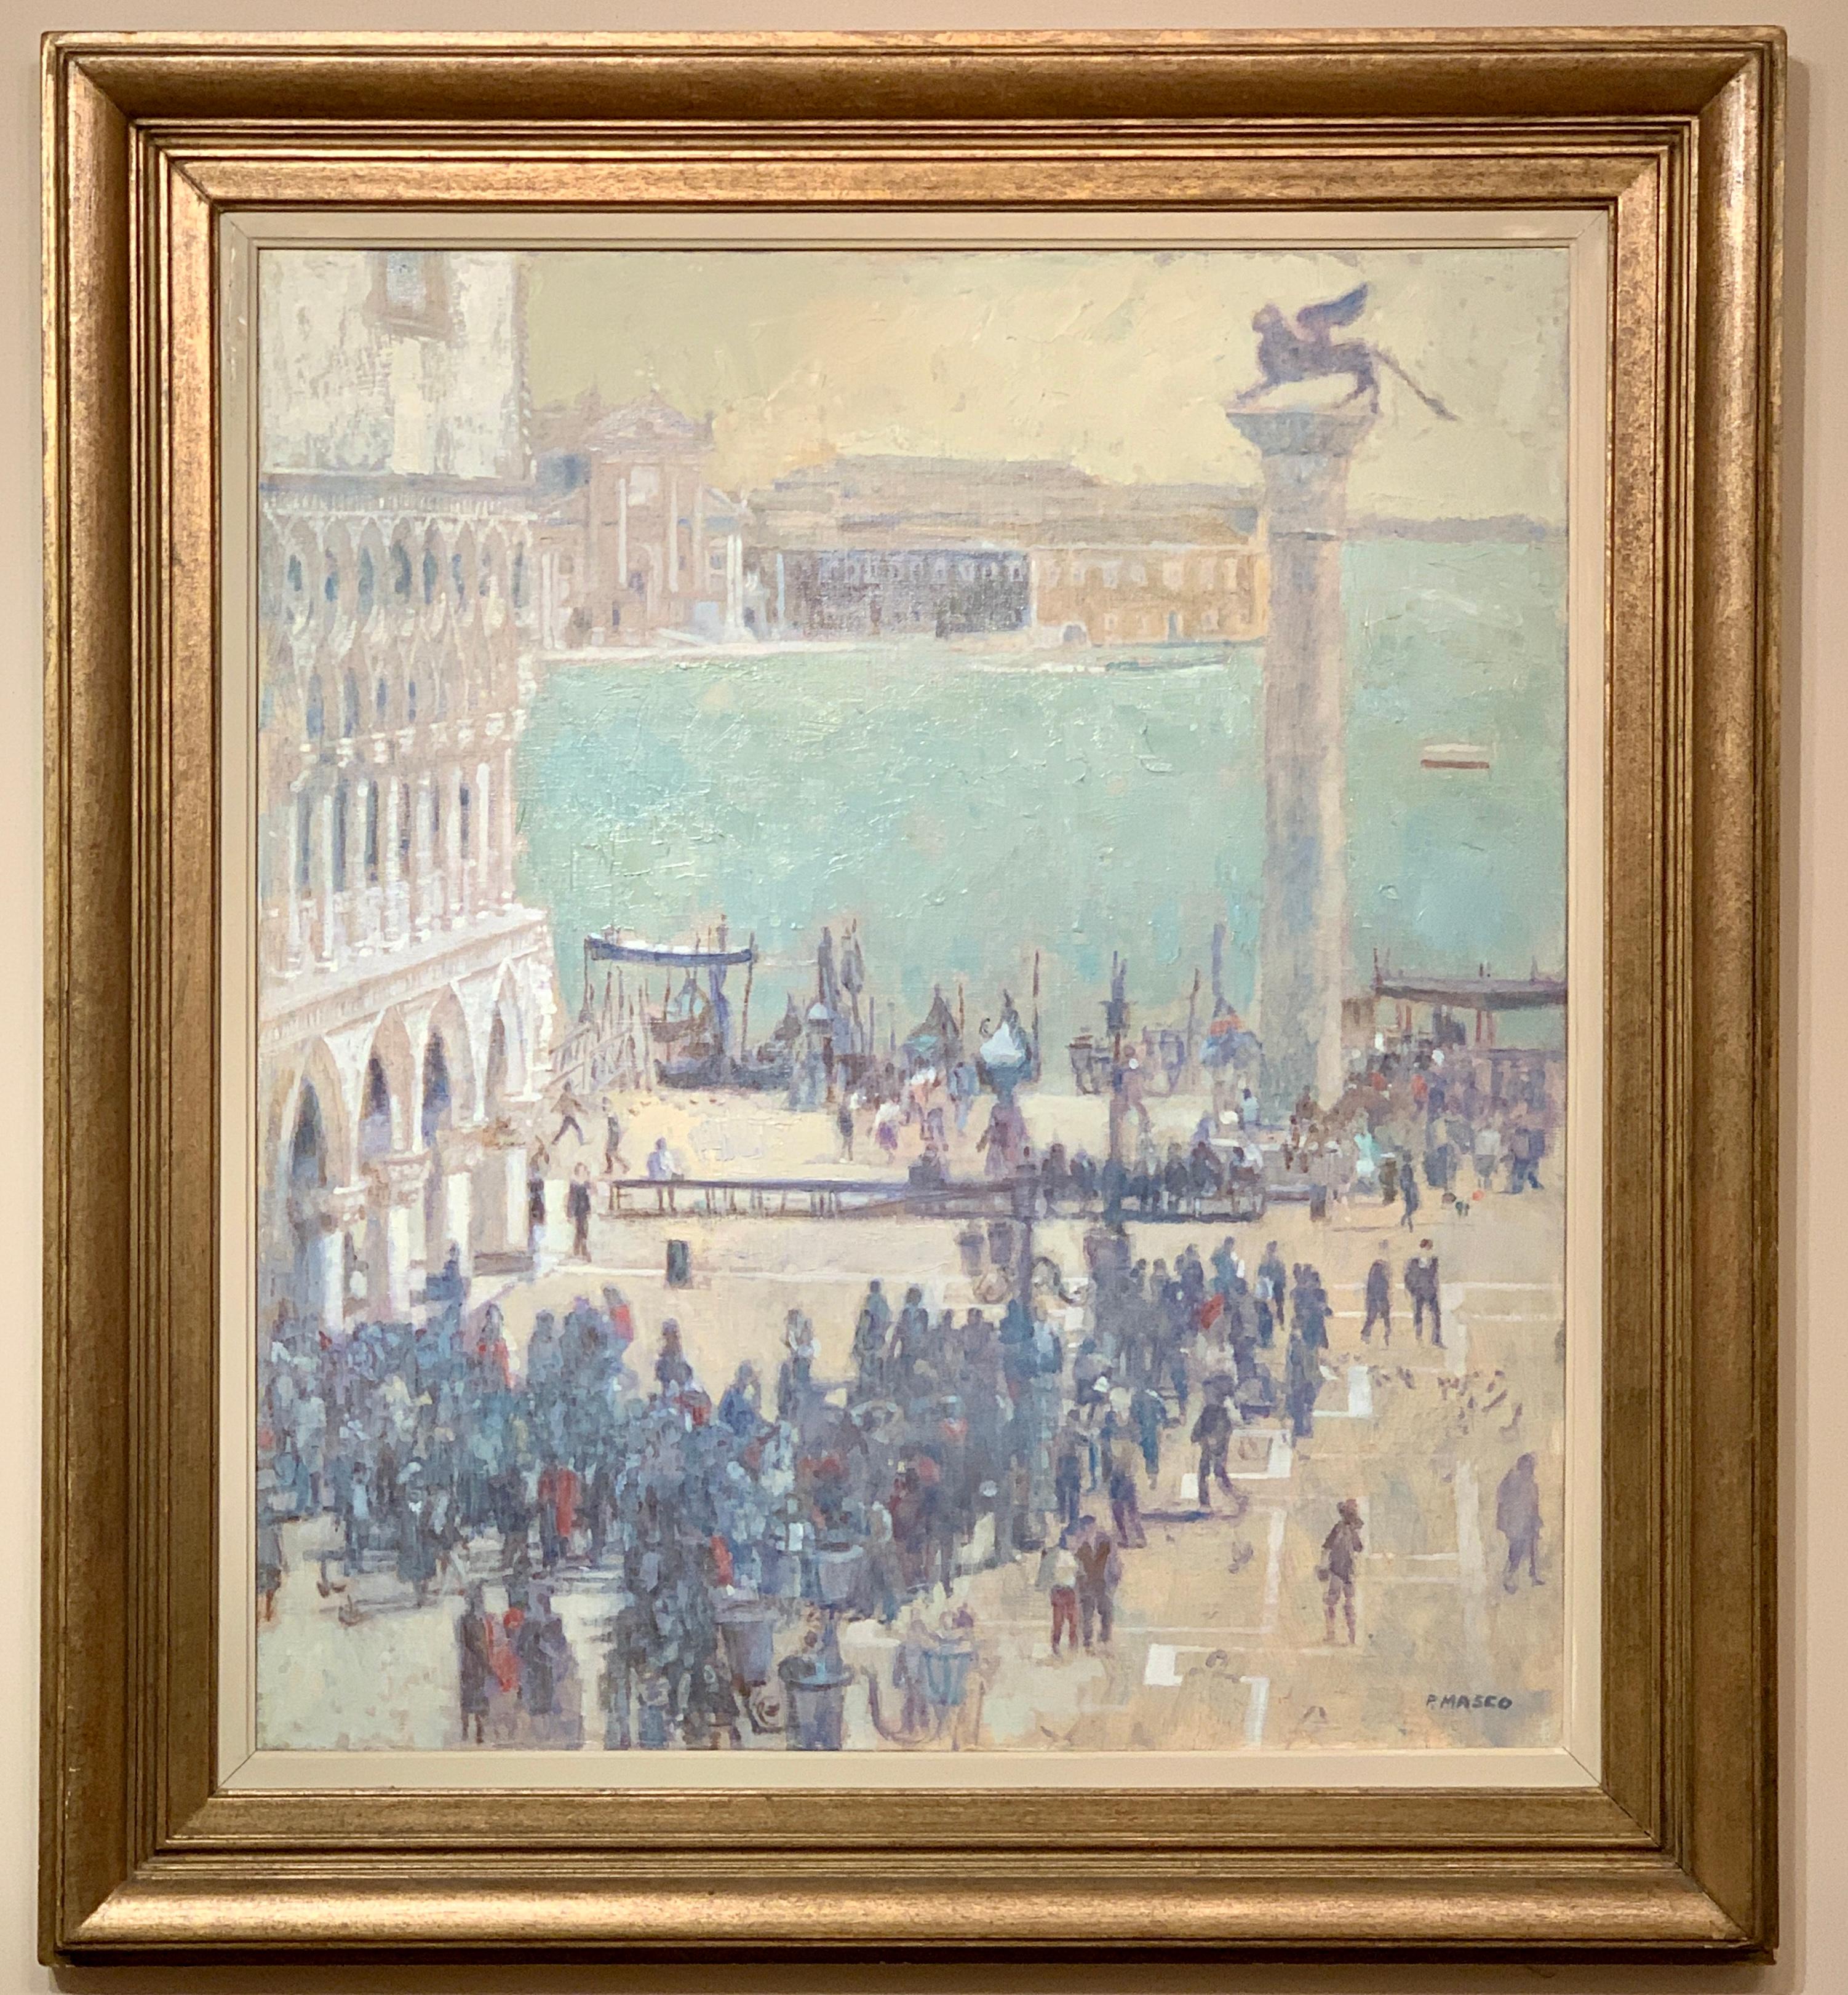 Impressionist view of people in  St. Marks Square in Venice - Painting by Pam Masco